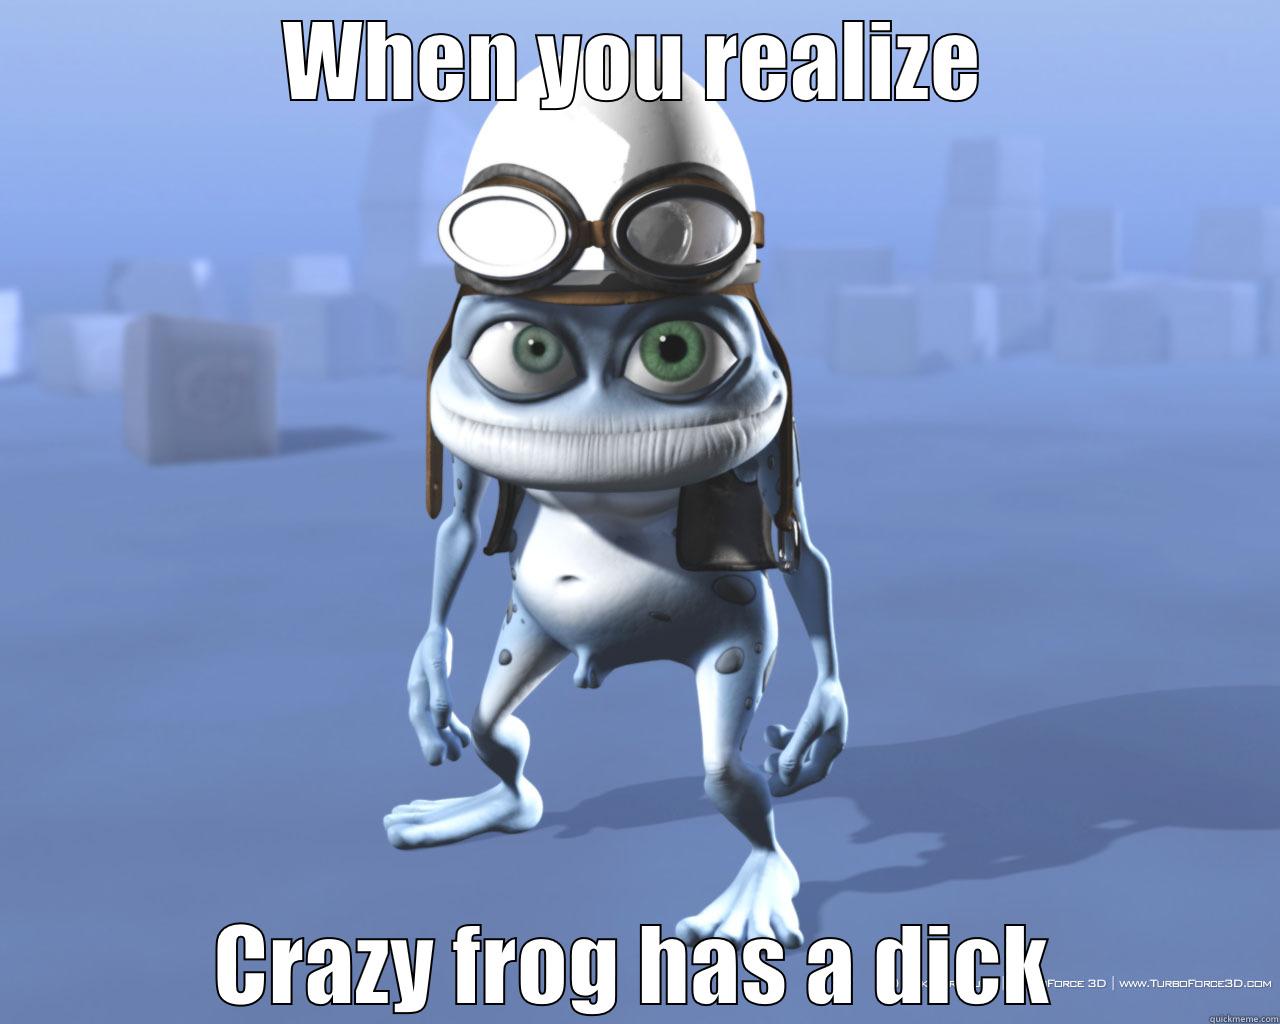 Crazy frog dick - WHEN YOU REALIZE CRAZY FROG HAS A DICK Misc